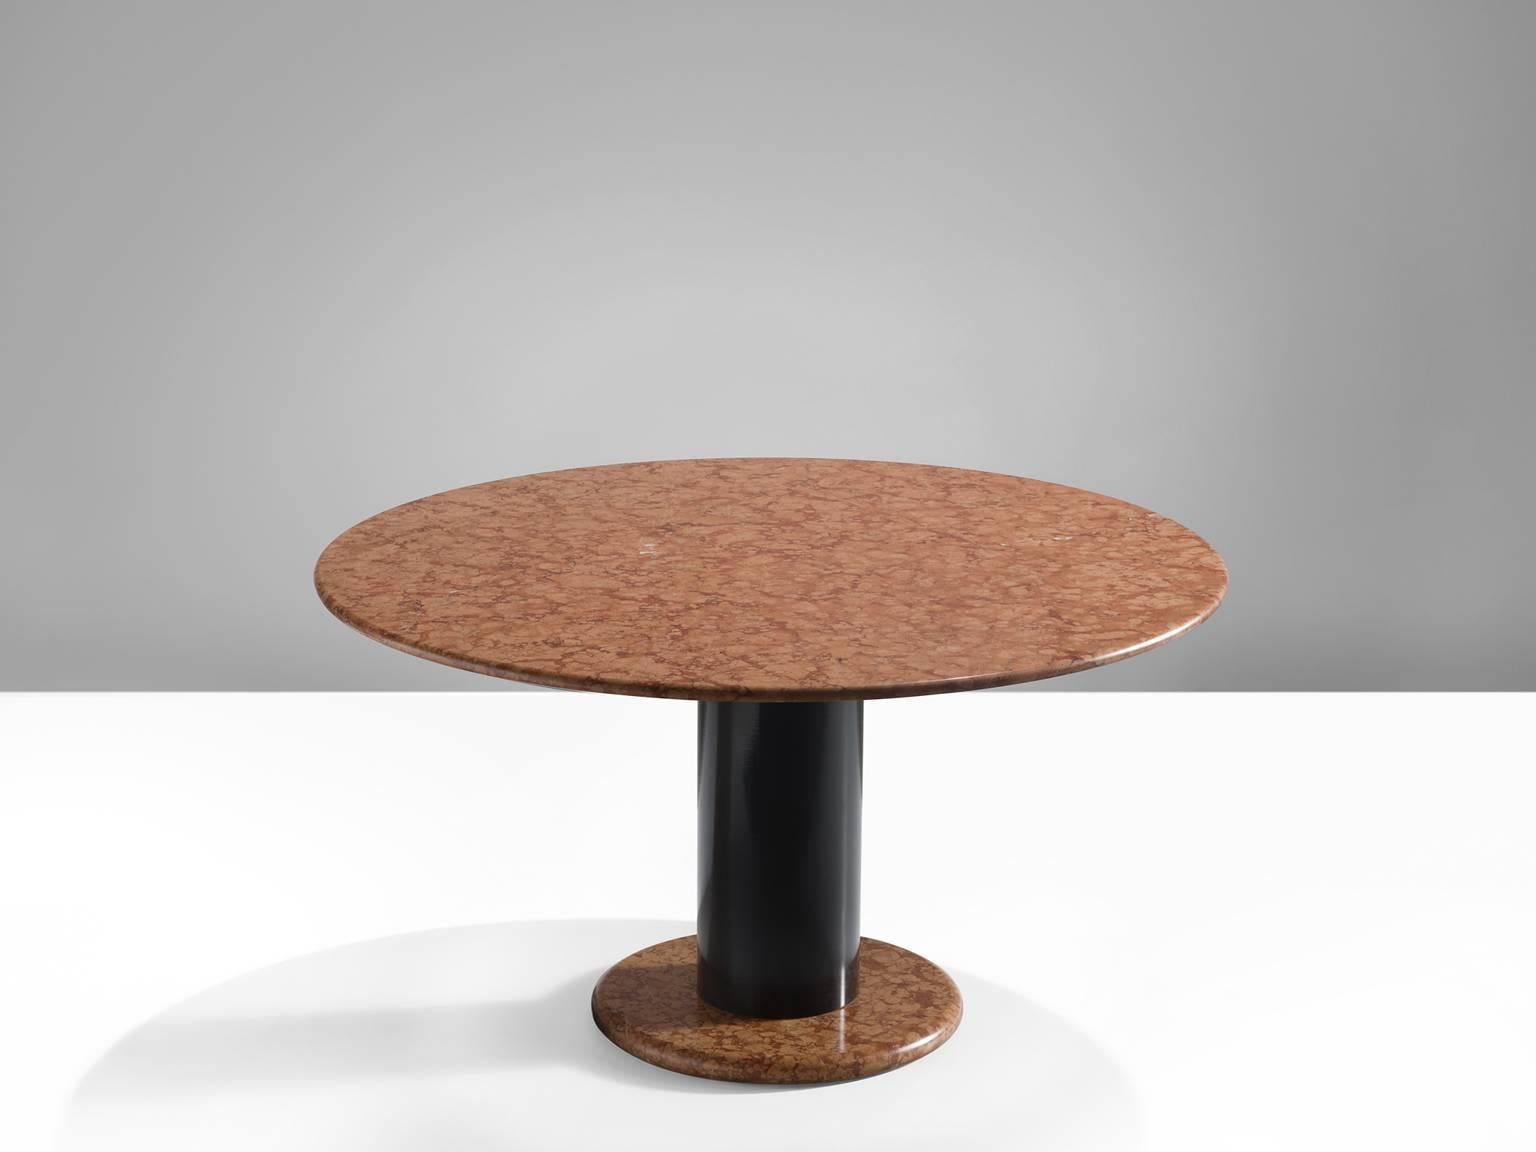 Table, in marble and metal, by Ettore Sottsass for Poltronova, Italy, 1965. 

Round pedestal table by Italian designer Ettore Sottsass. A orange-pink round base with black metal cylindrical column. The round top is executed in beautiful rose